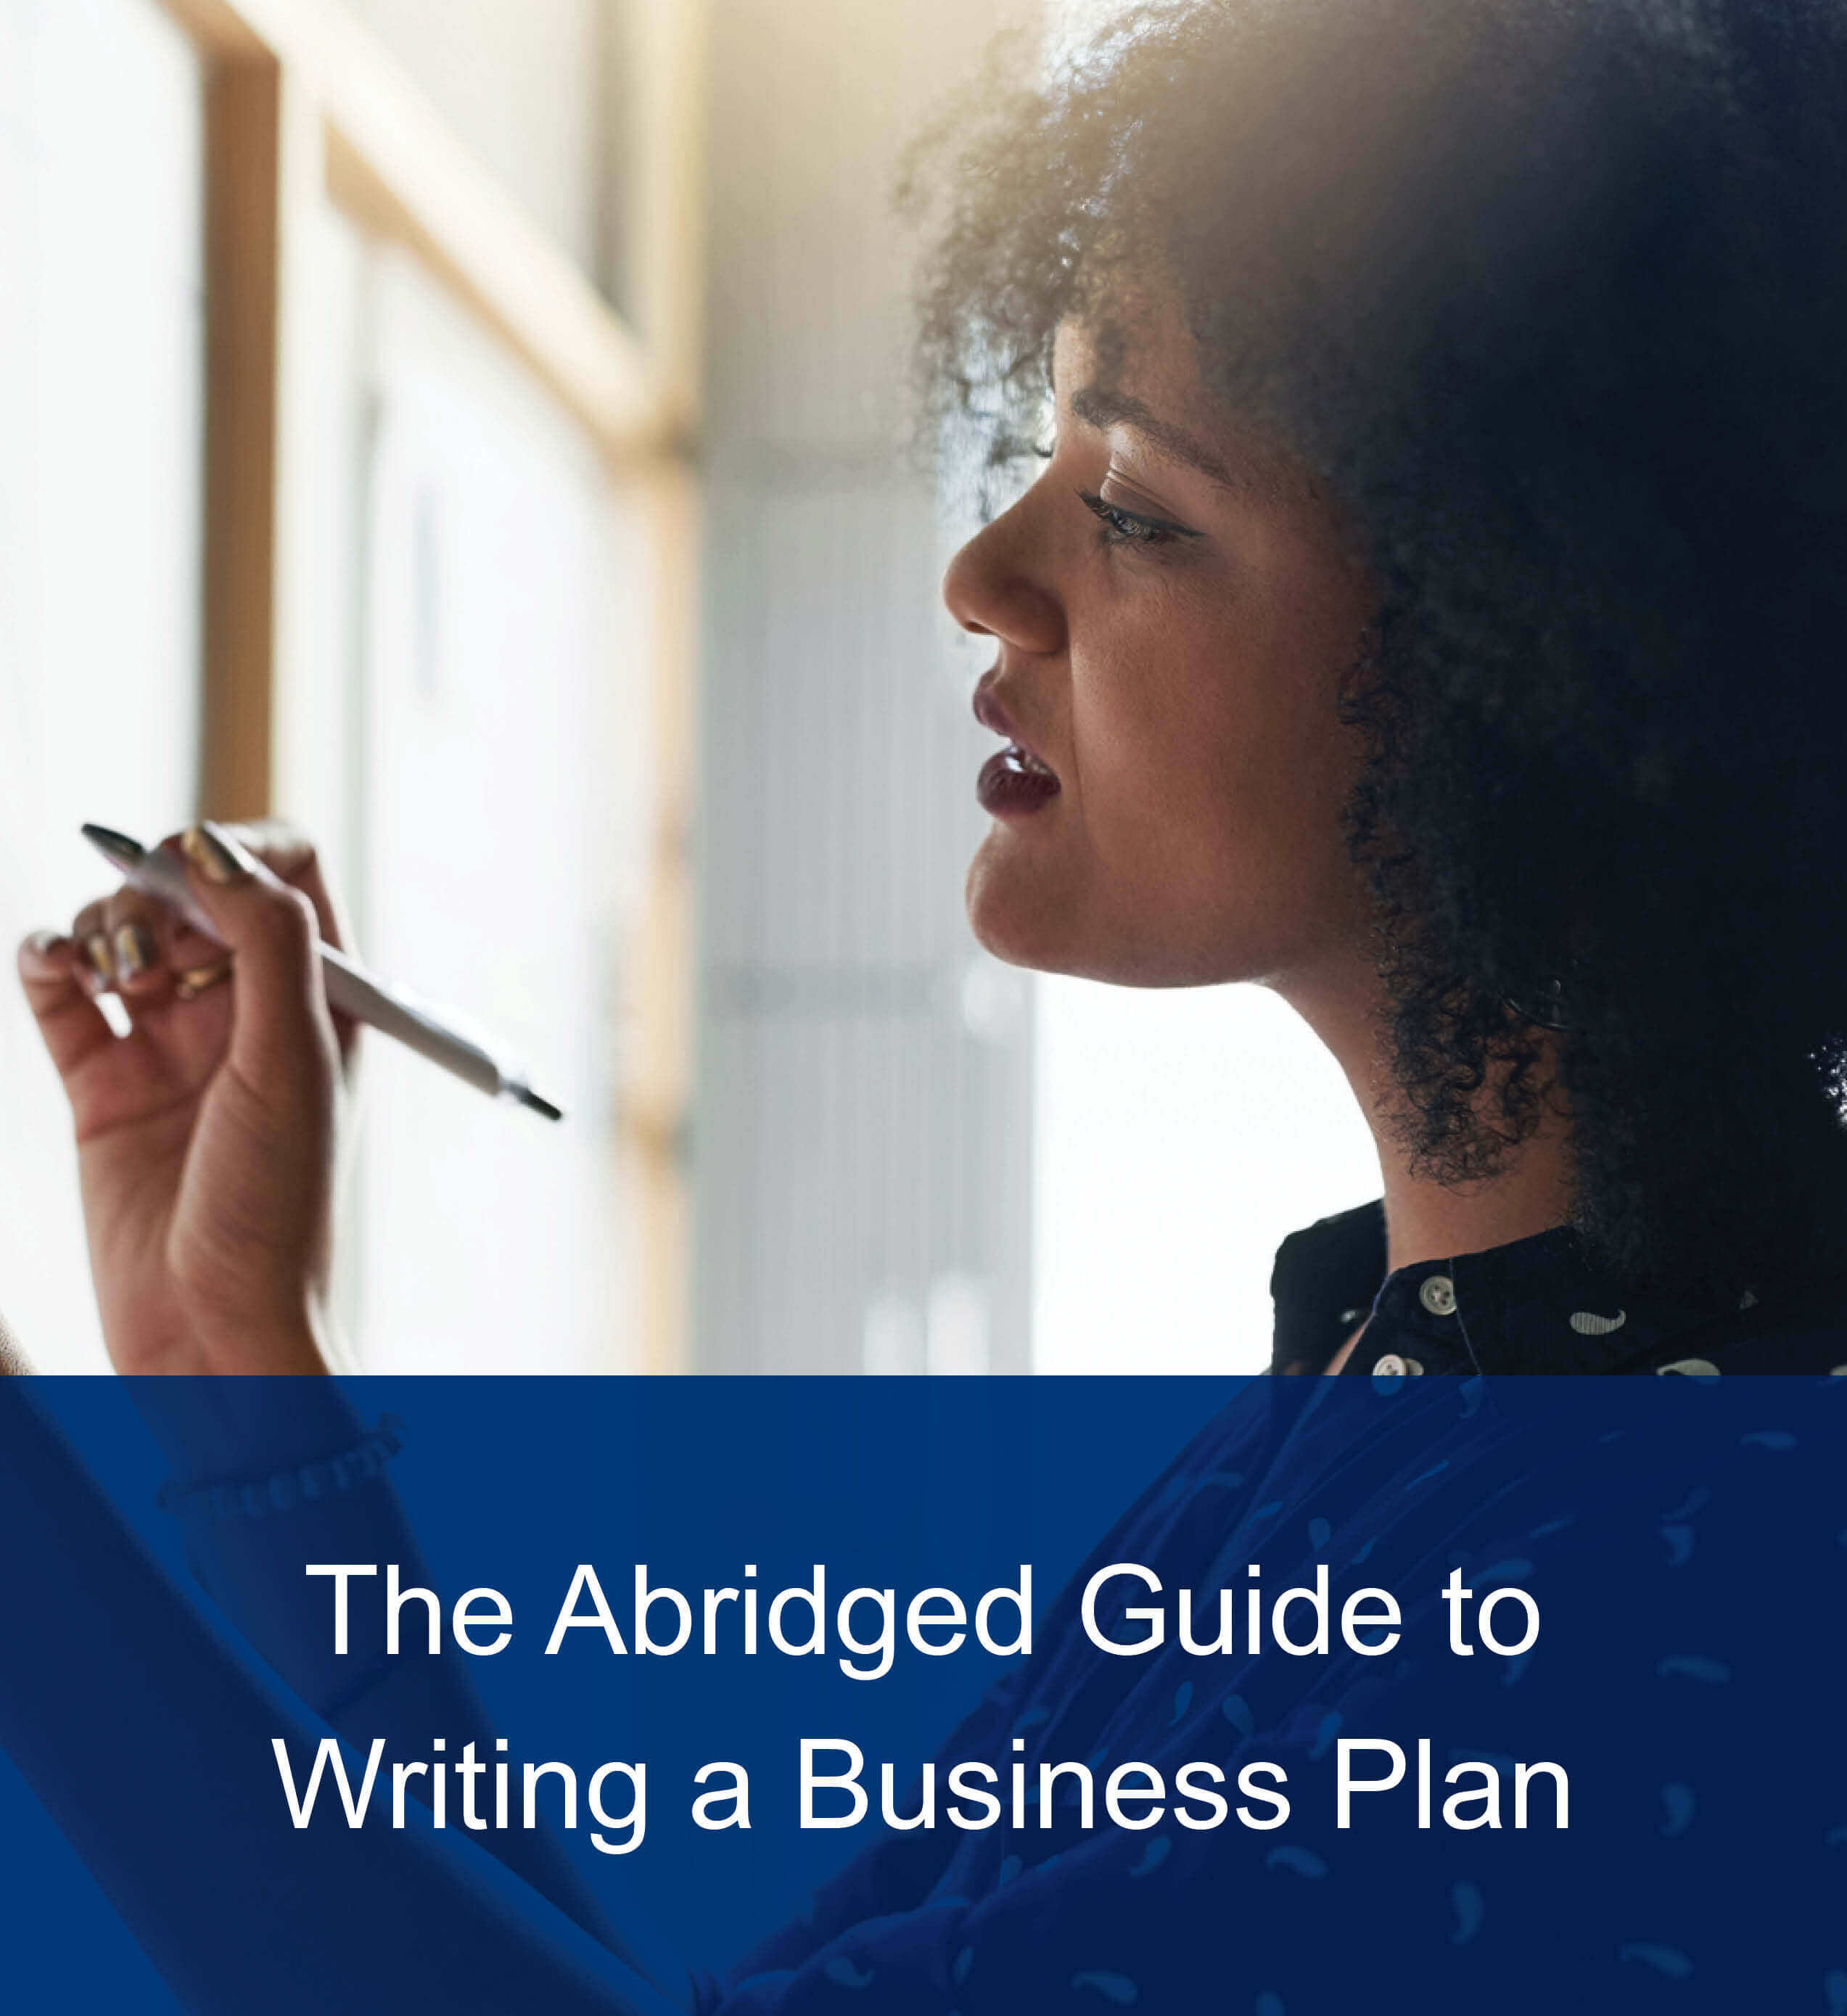 The Abridged Guide to Writing a Business Plan